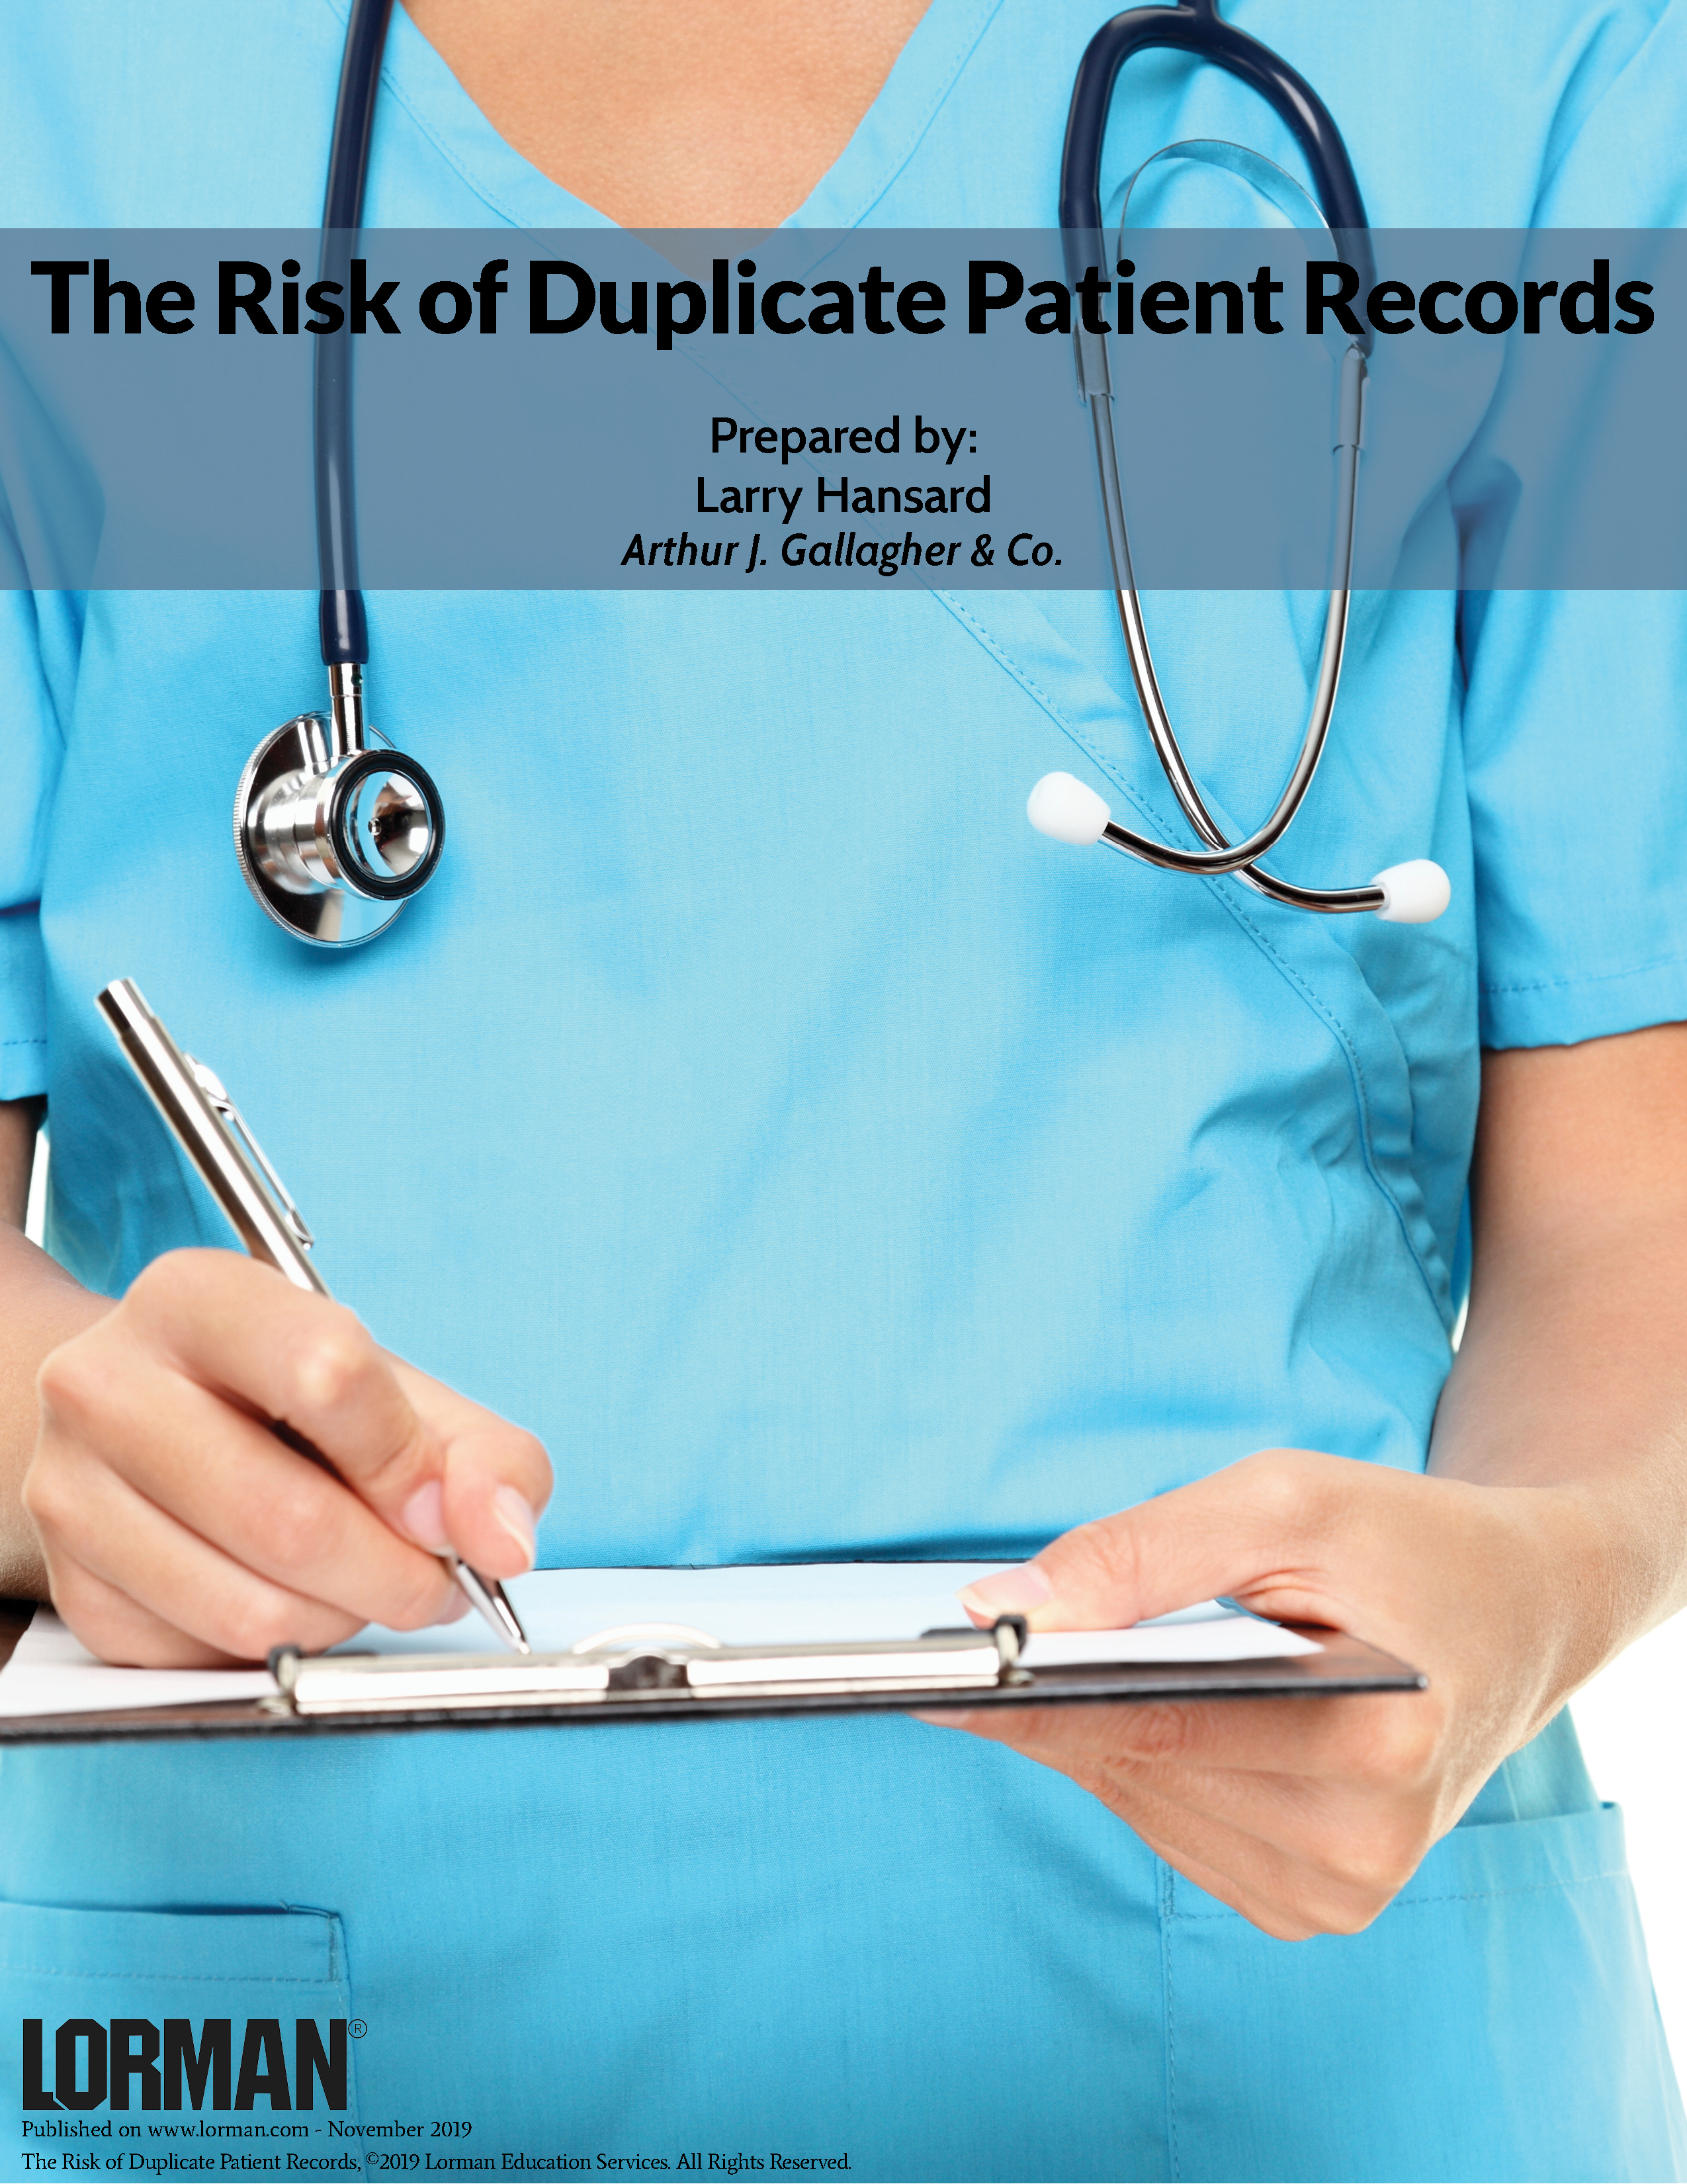 The Risk of Duplicate Patient Records